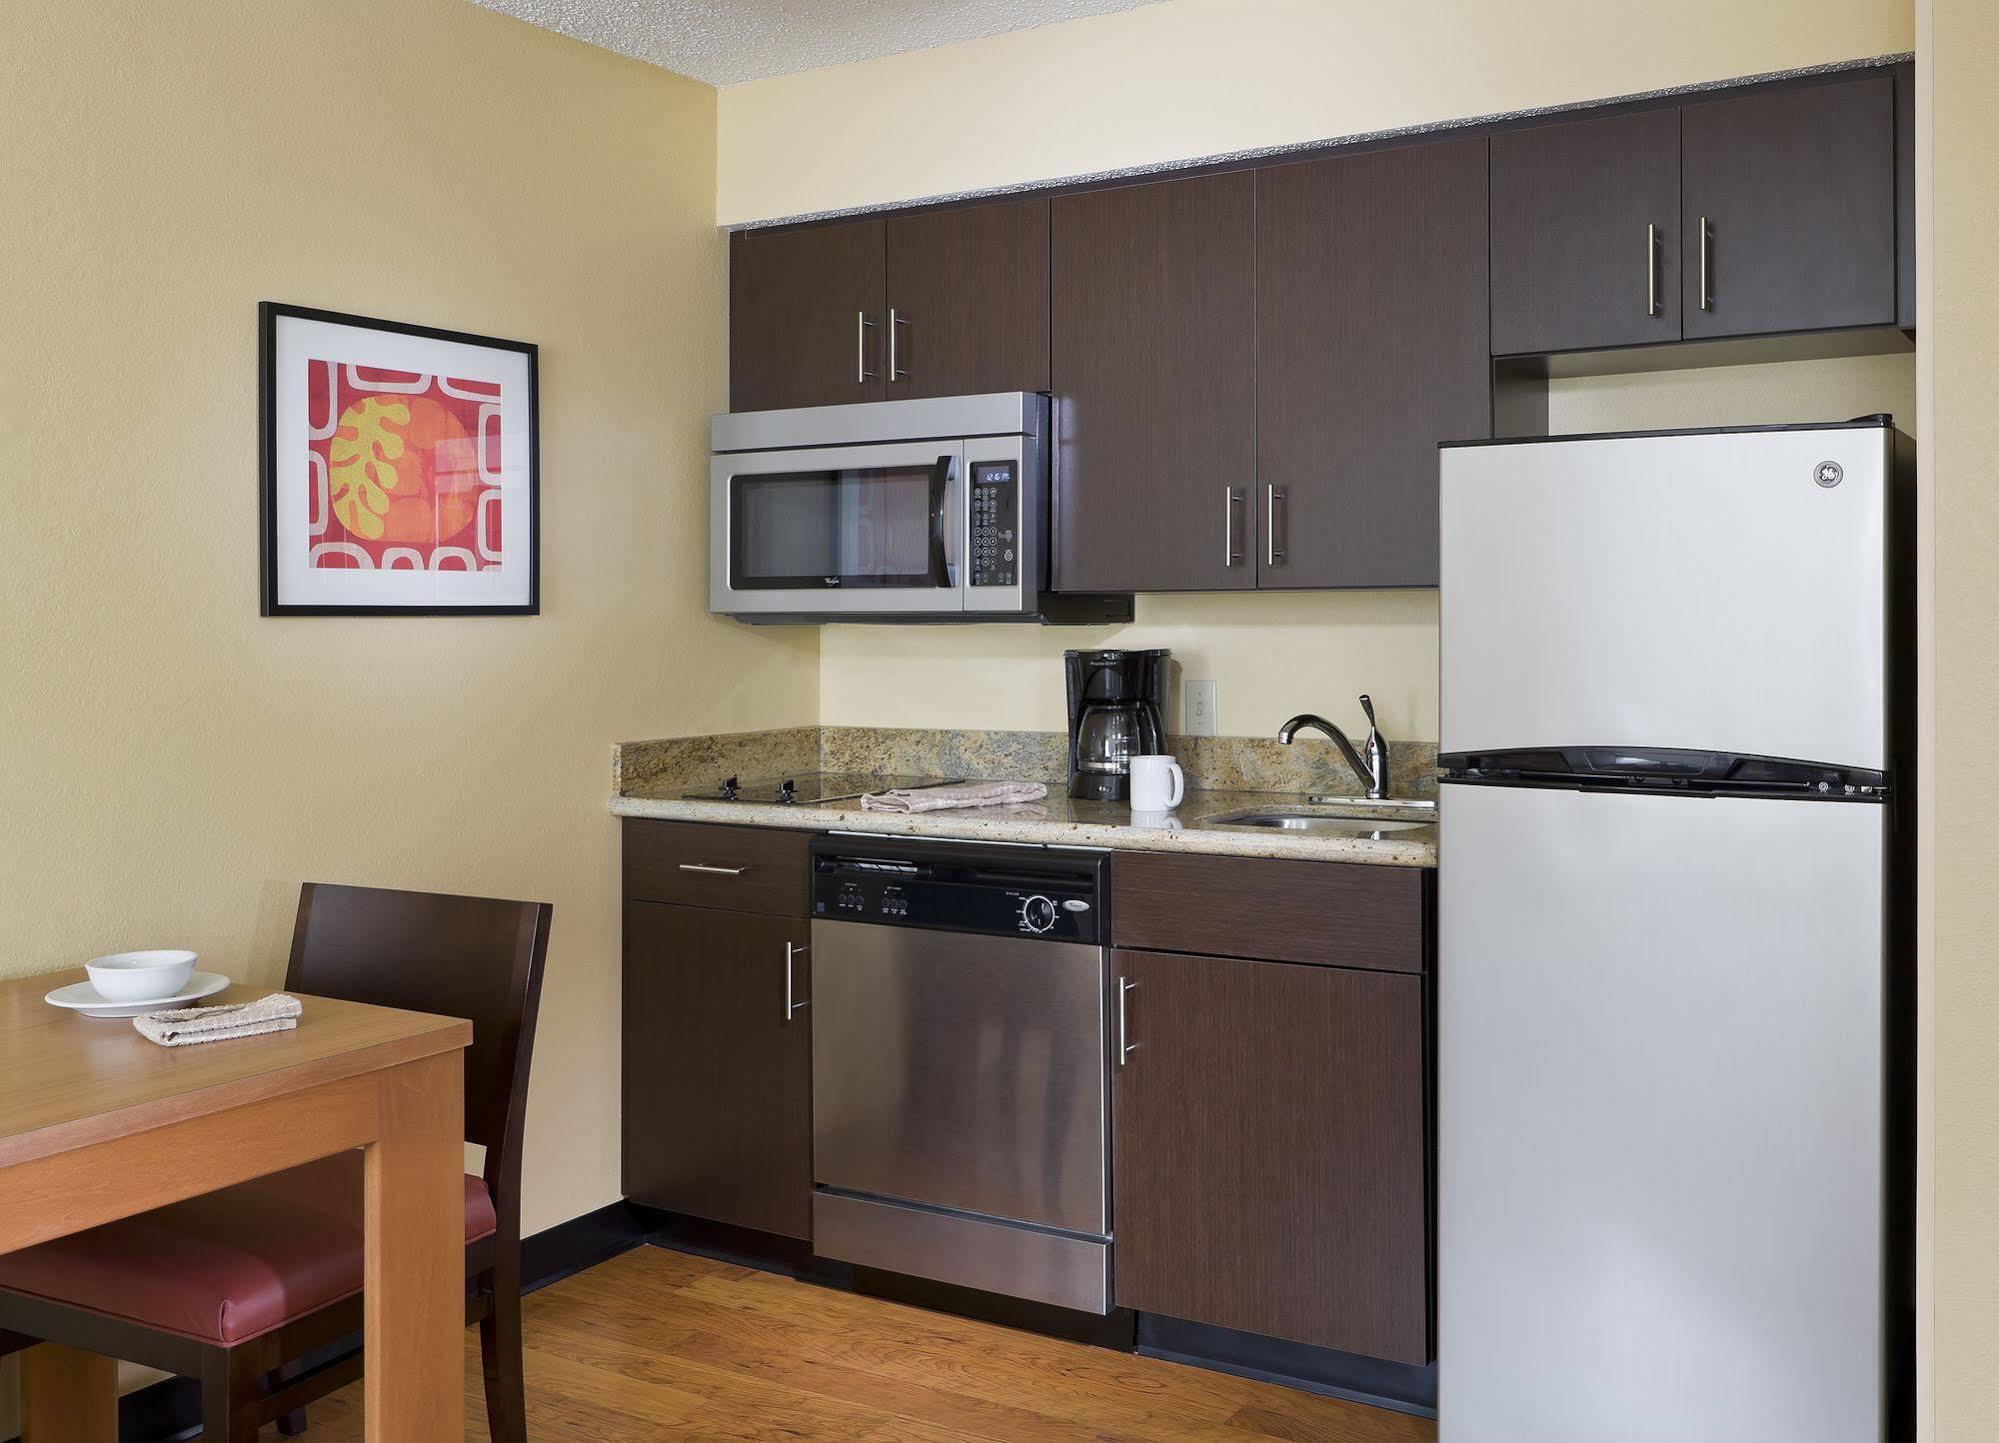 TownePlace Suites by Marriott Houston Galleria Area